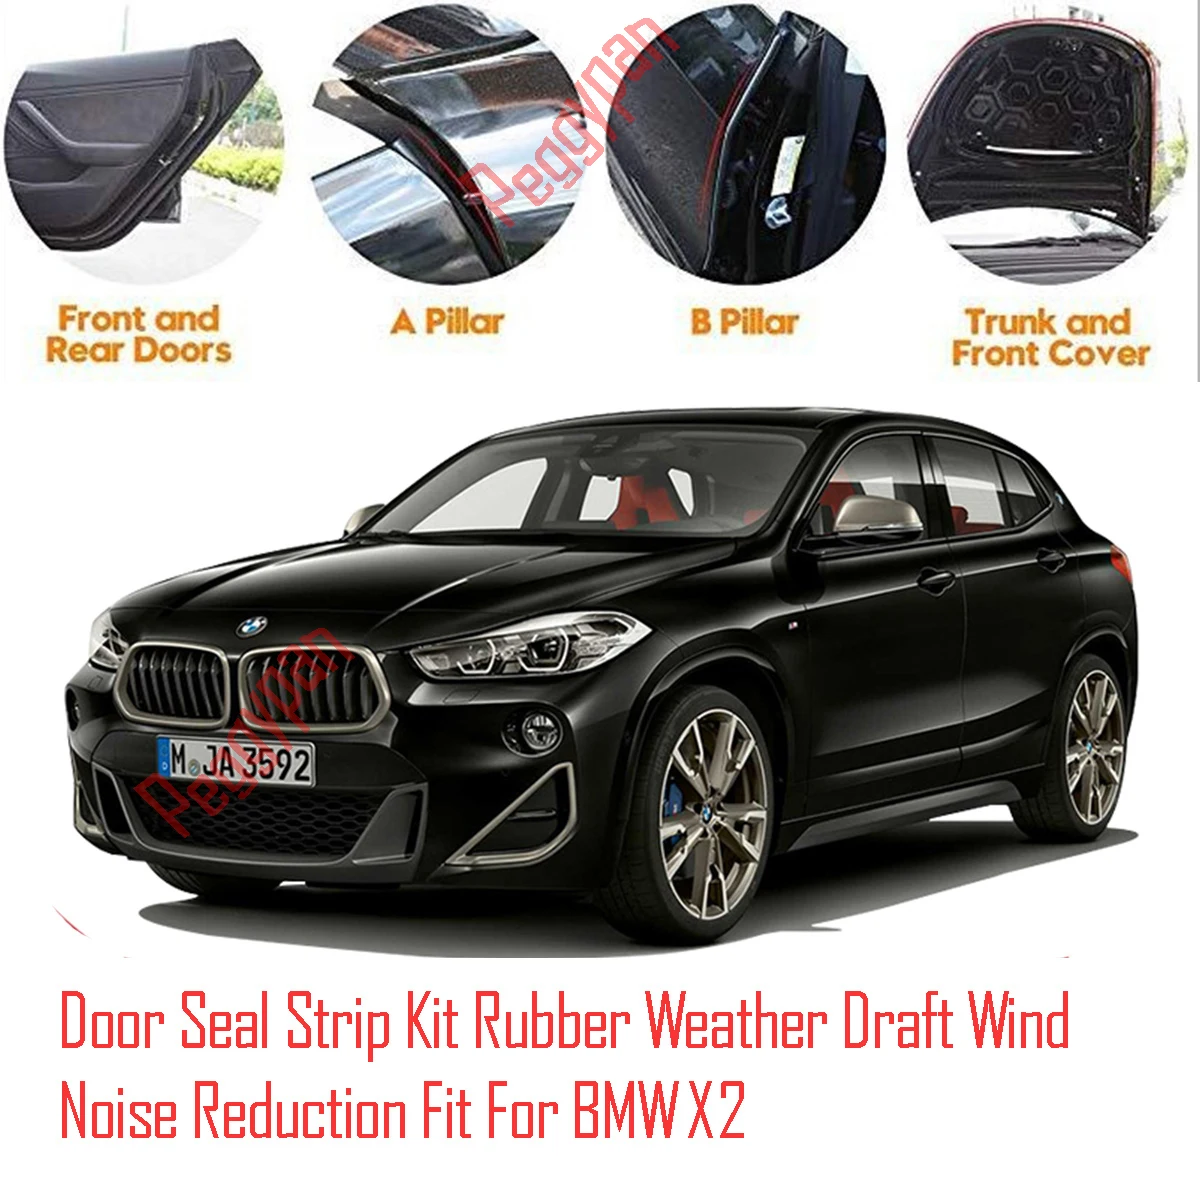 Door Seal Strip Kit Self Adhesive Window Engine Cover Soundproof Rubber Weather Draft Wind Noise Reduction Fit For BMW X2